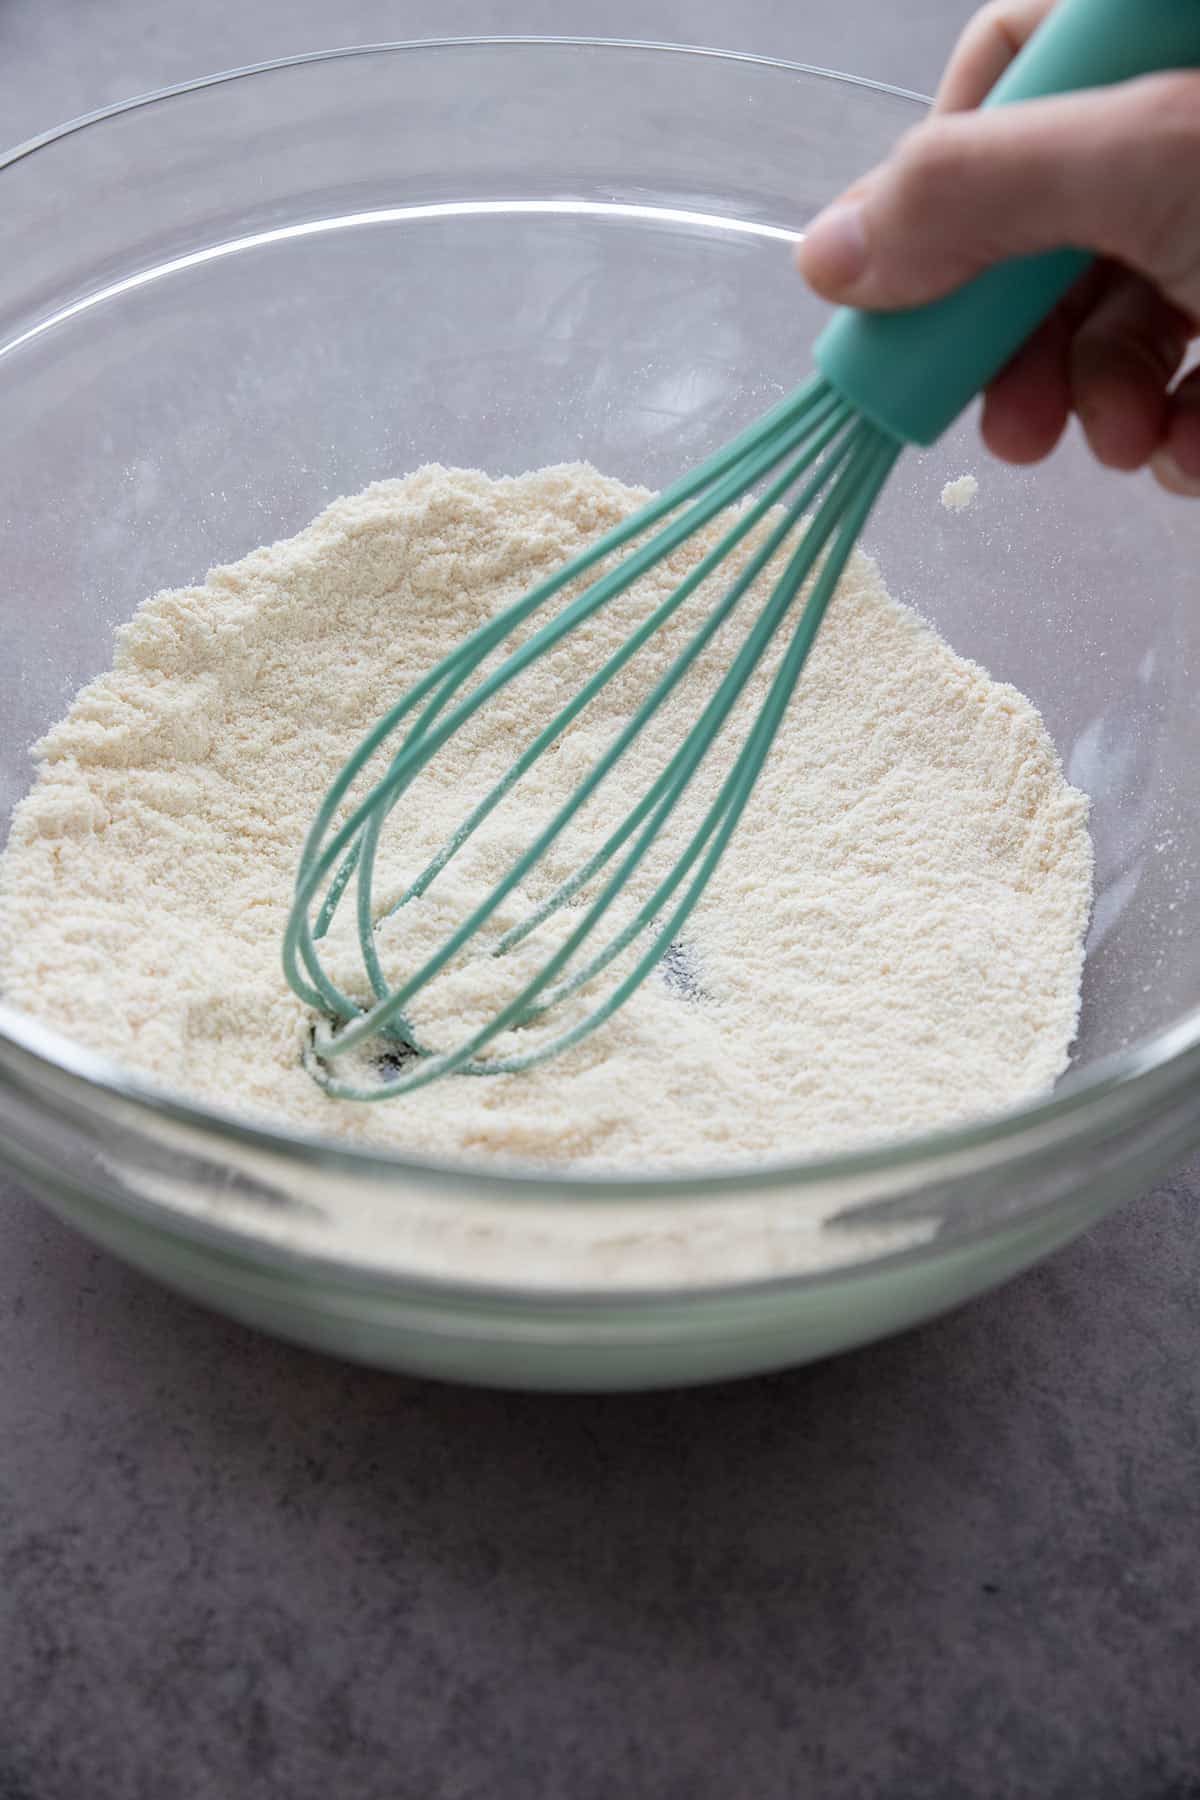 Step 1: Whisking the dry ingredients.